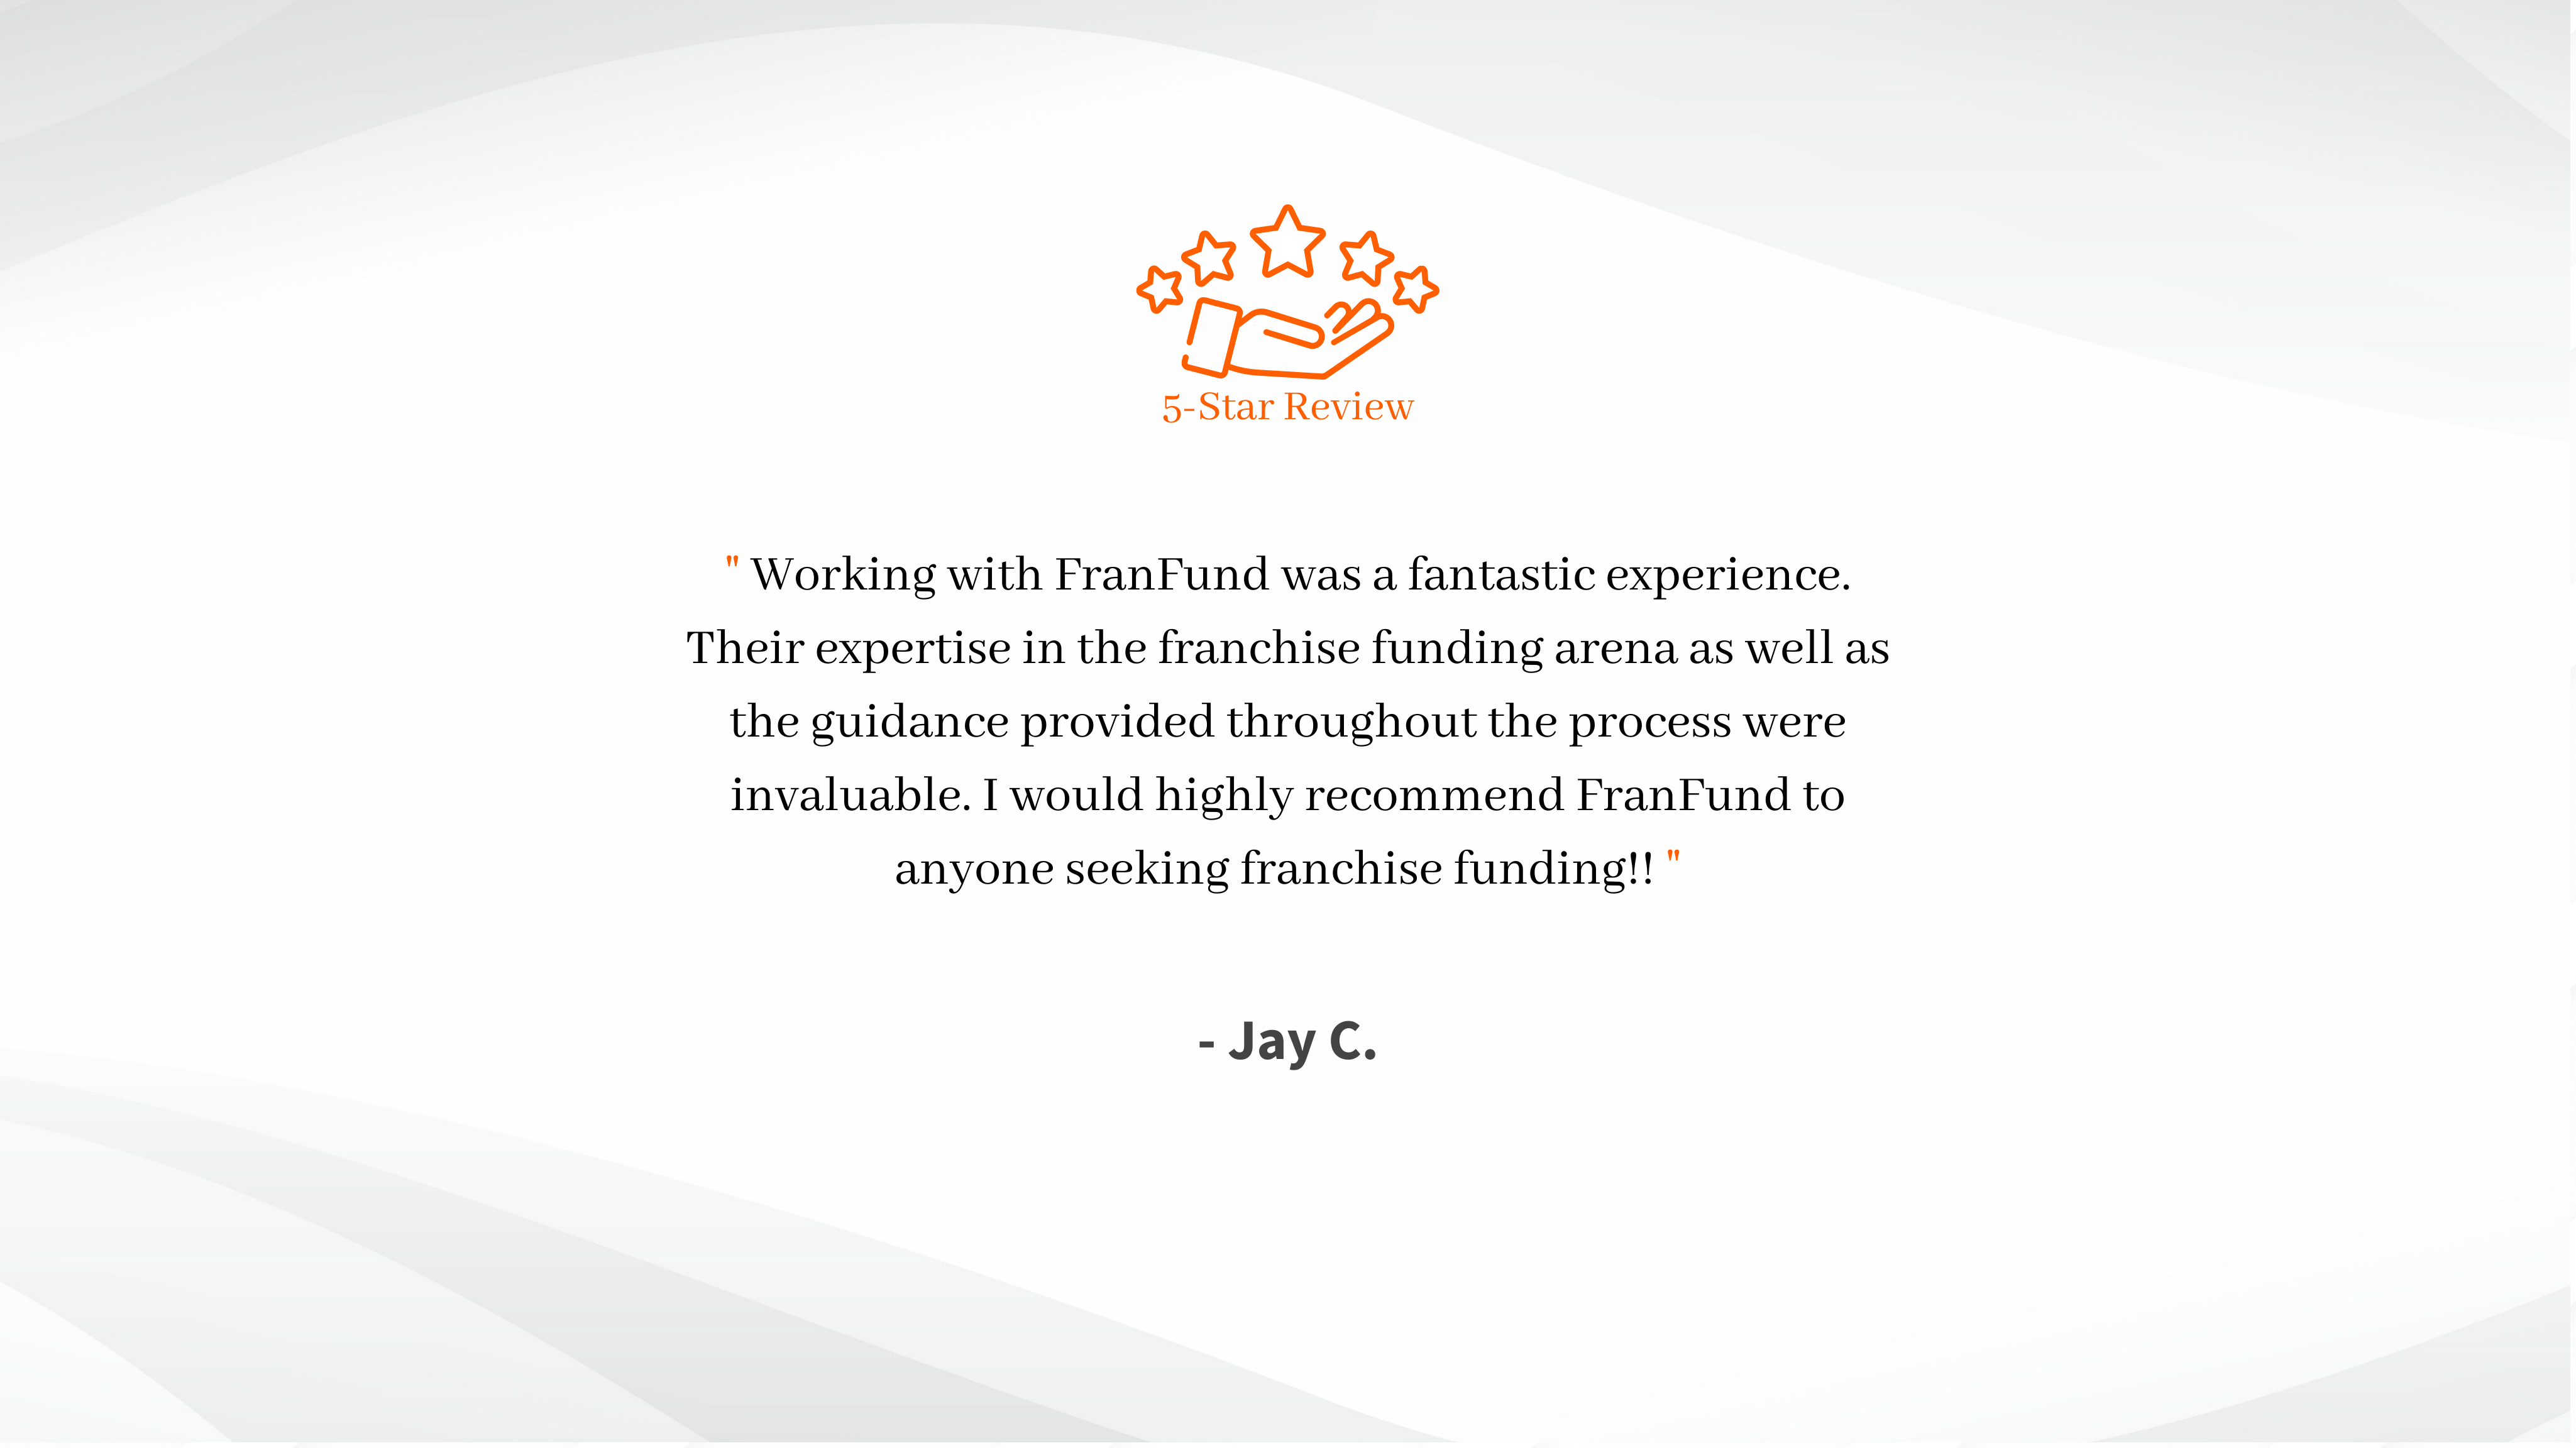 Working with FranFund was a fantastic experience. Their expertise in the franchise funding arena as well as the guidance provided throughout the process were invaluable. I would highly recommend FranFund to (9)